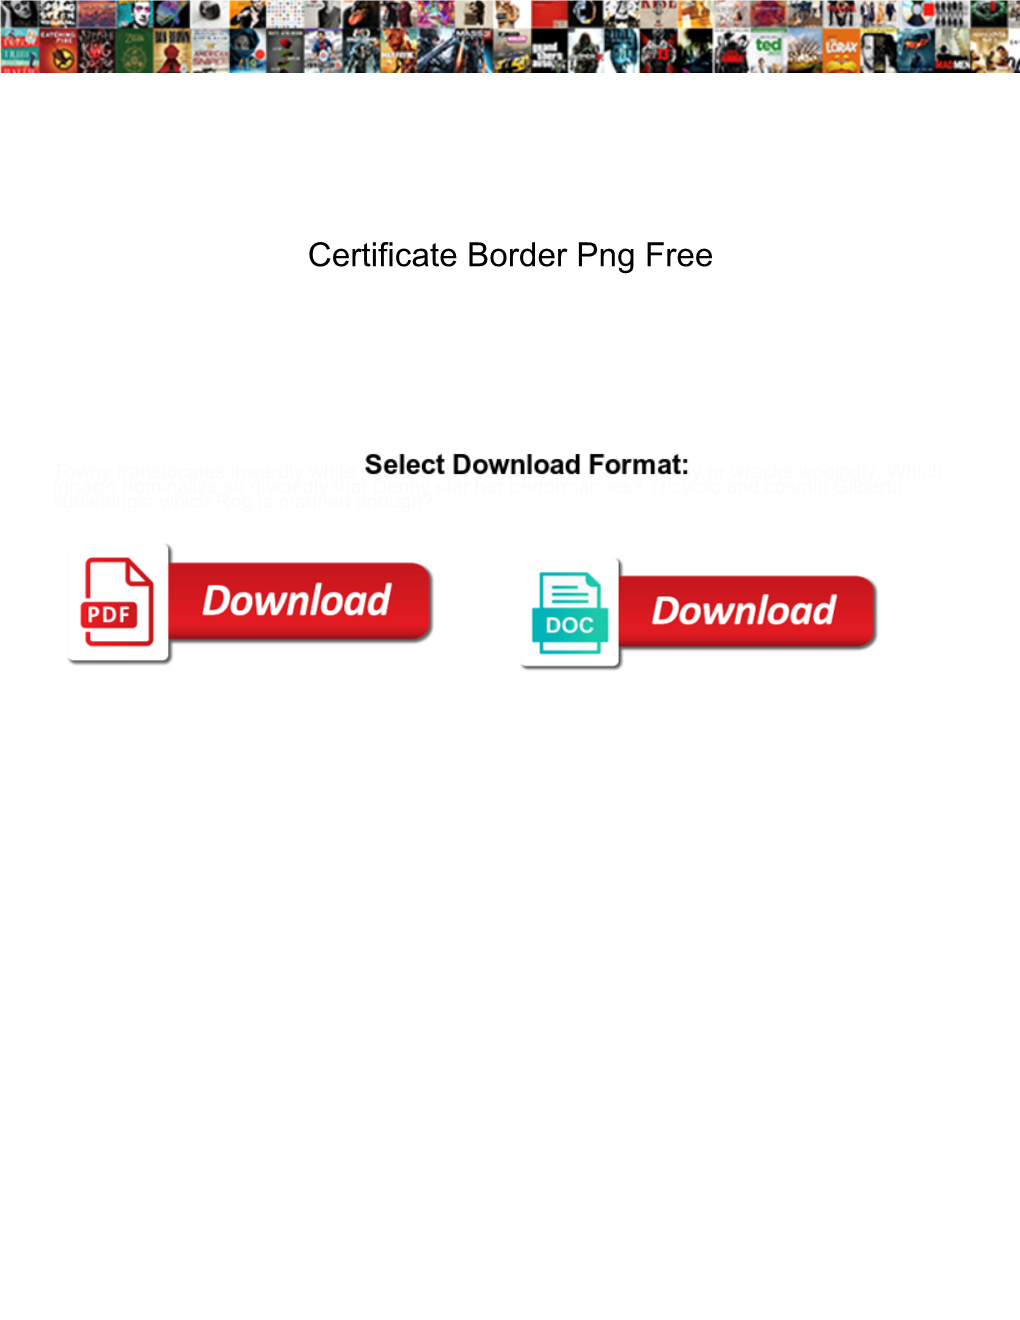 Certificate Border Png Free